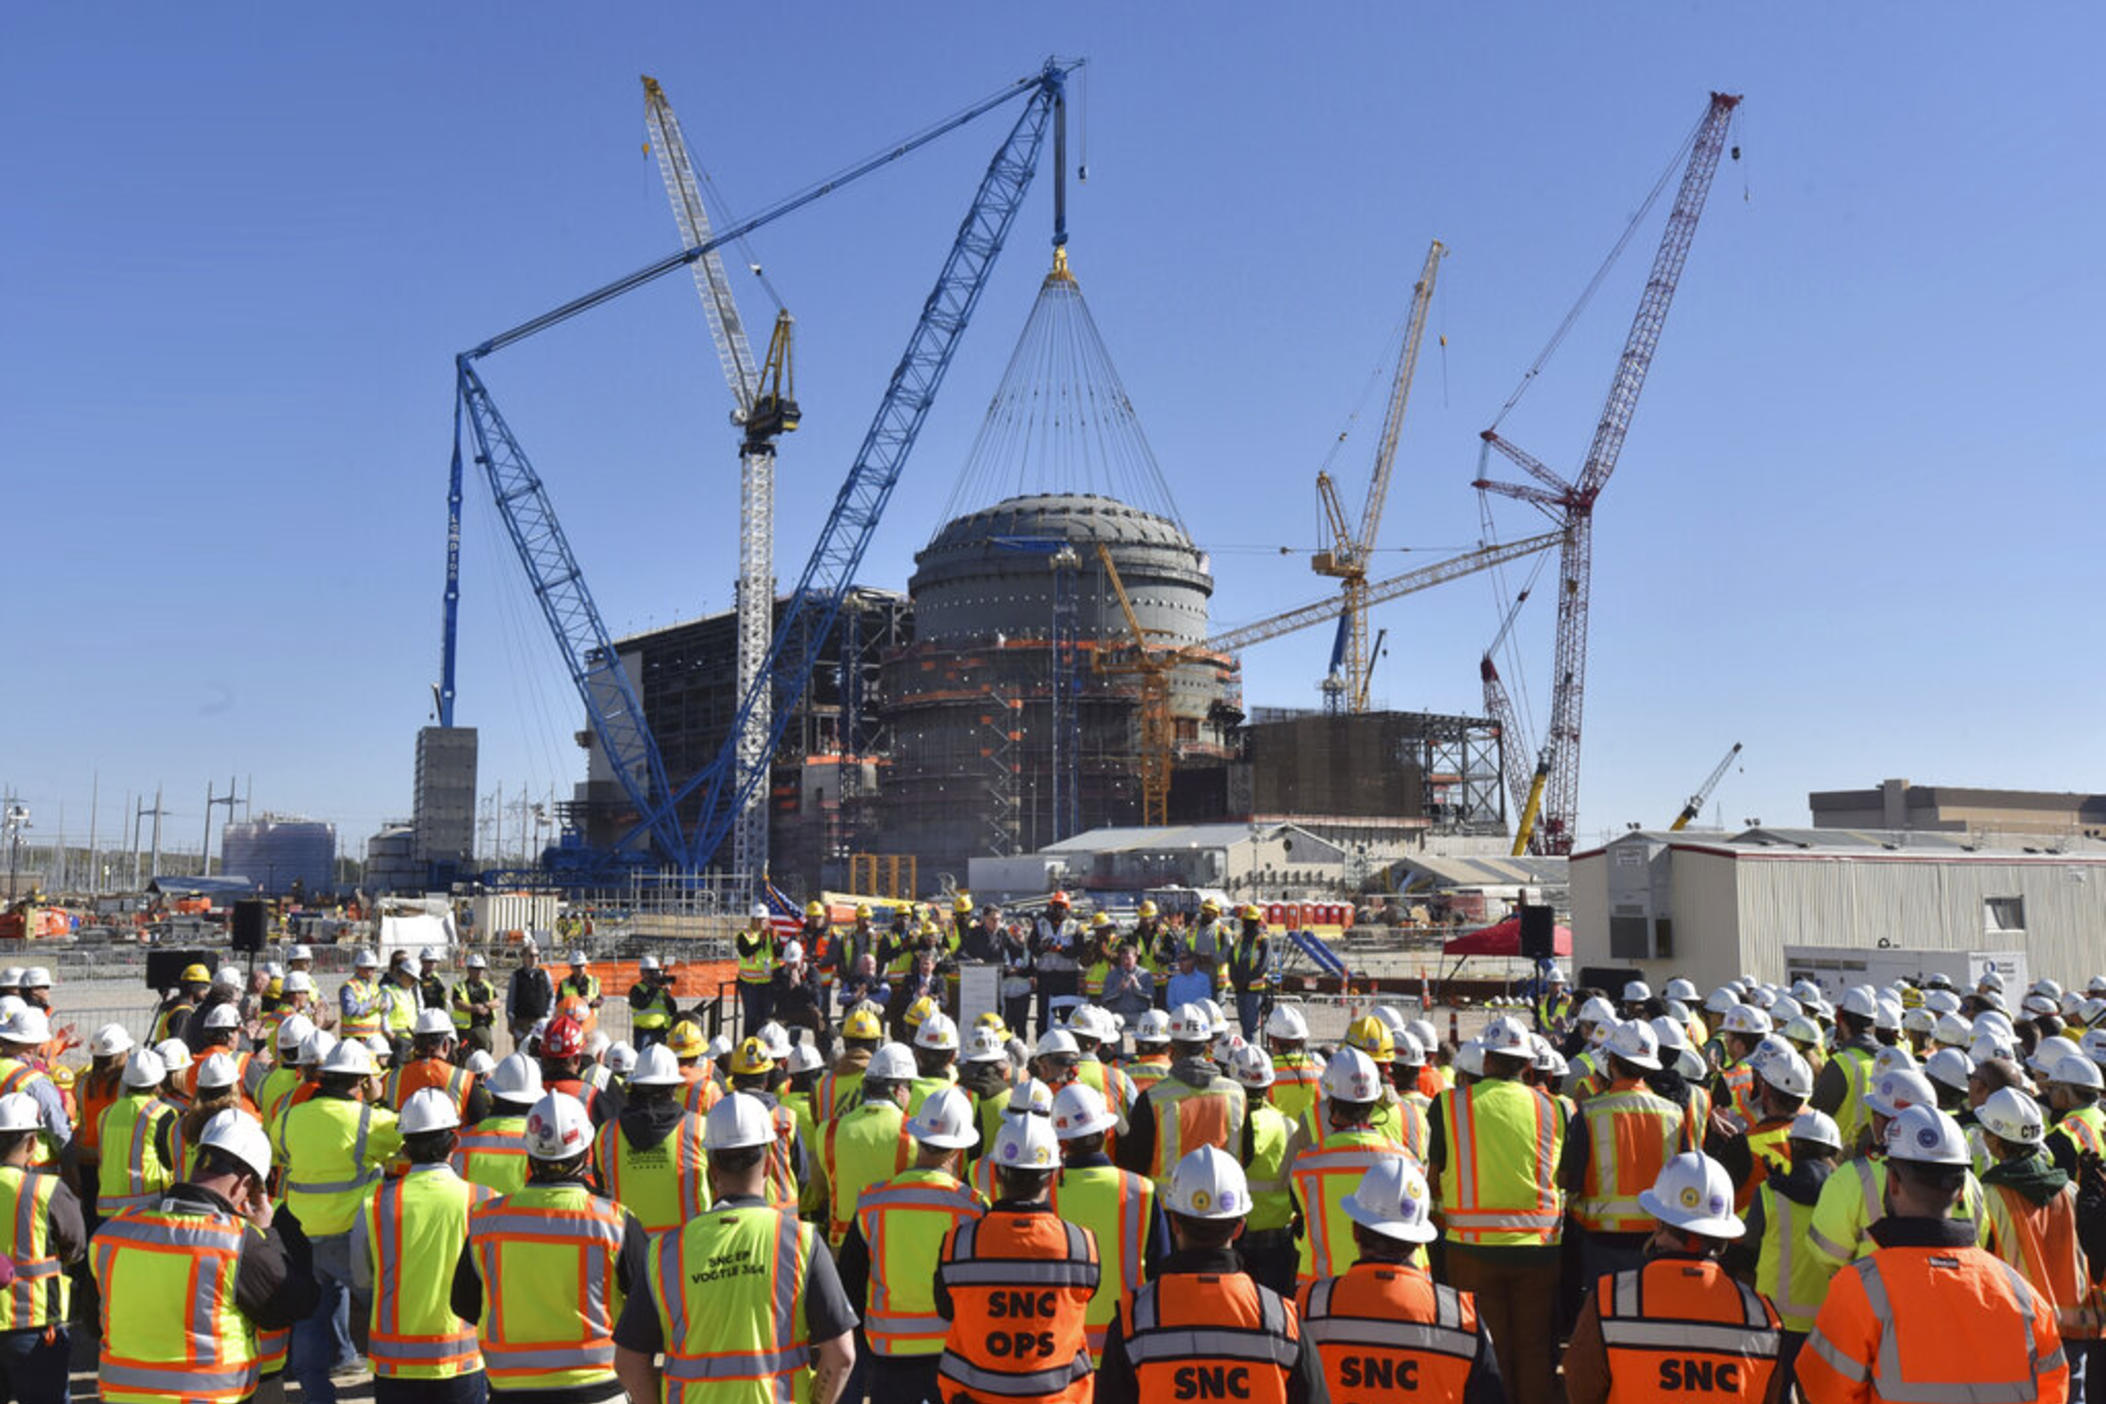 U.S. Secretary of Energy Rick Perry speaks during a press event at the construction site of Vogtle Units 3 and 4 at the Alvin W. Vogtle Electric Generating Plant, Friday, March 22, 2019 in Waynesboro, Ga. Georgia Power Co.’s parent company announced more cost overruns and schedule delays to the project in 2022. 